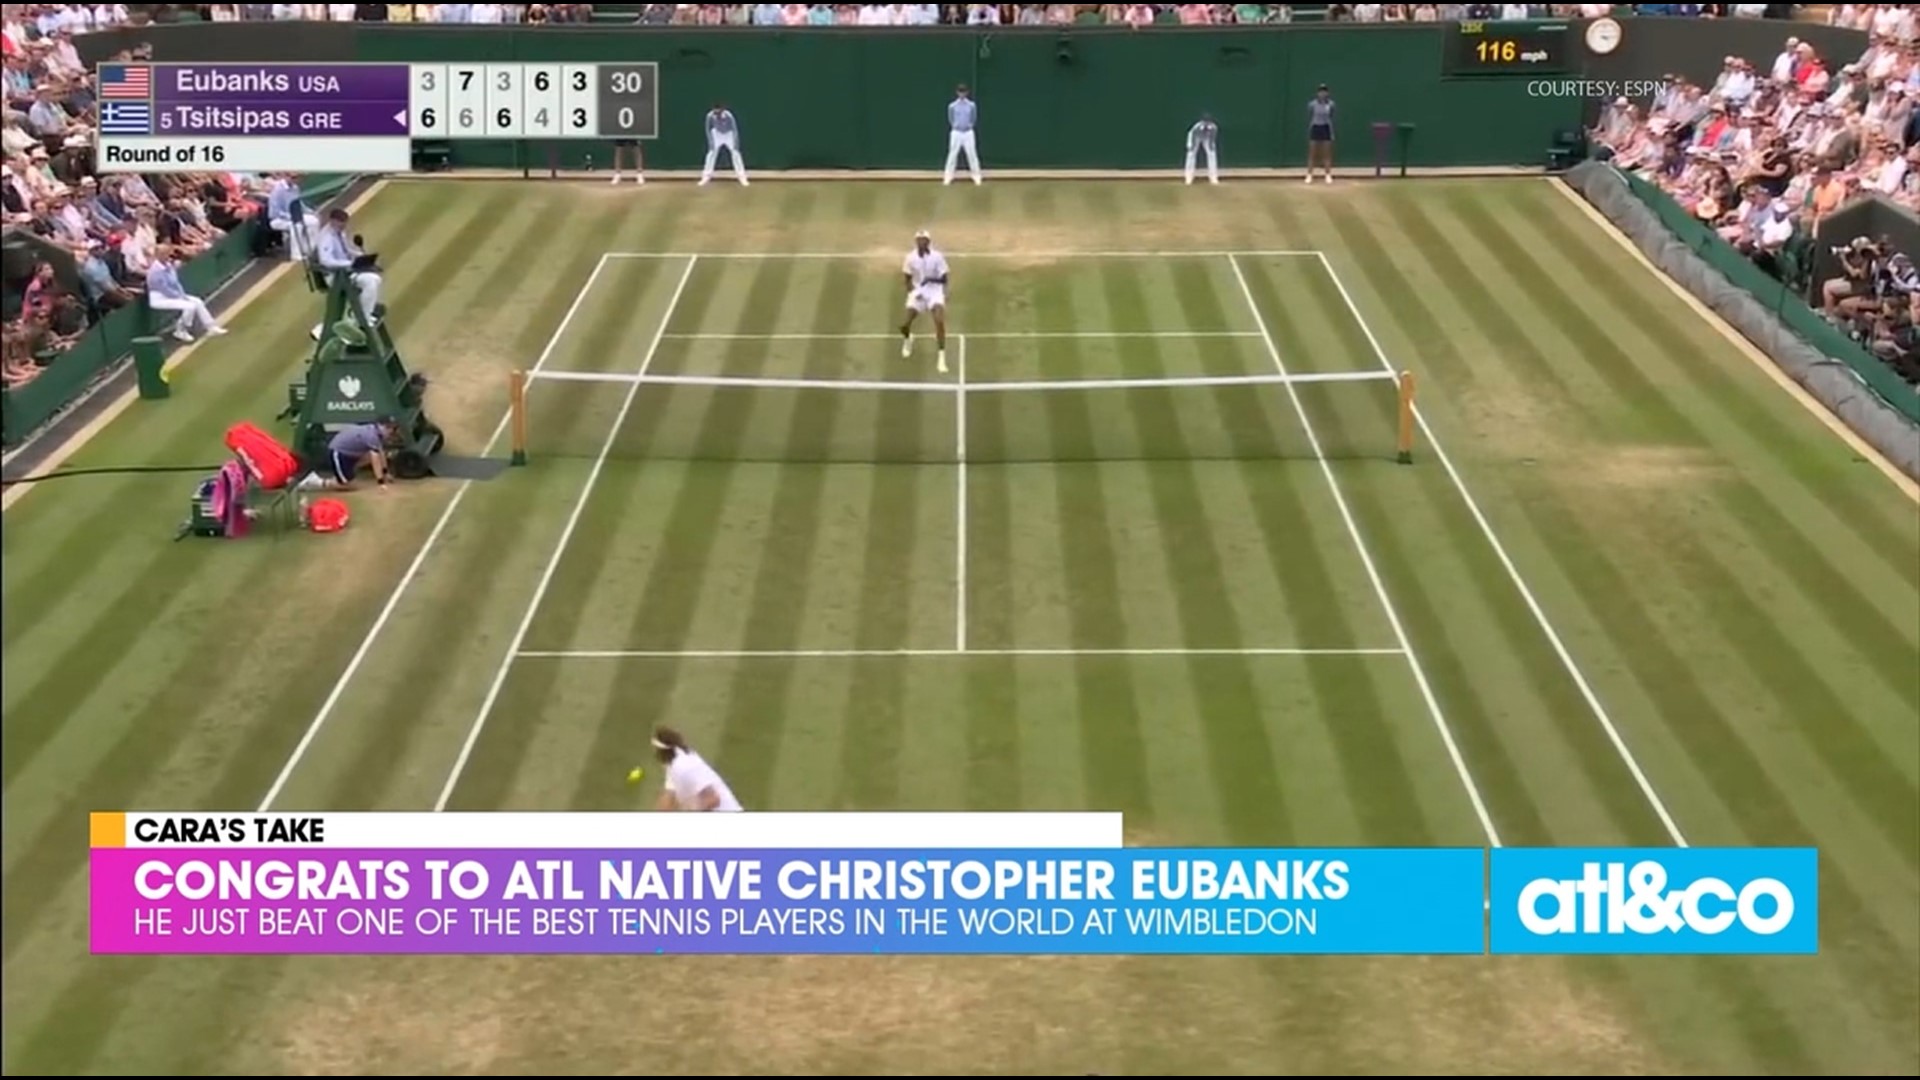 Tennis star Christopher Eubanks just beat one of the best players in the world at Wimbledon.